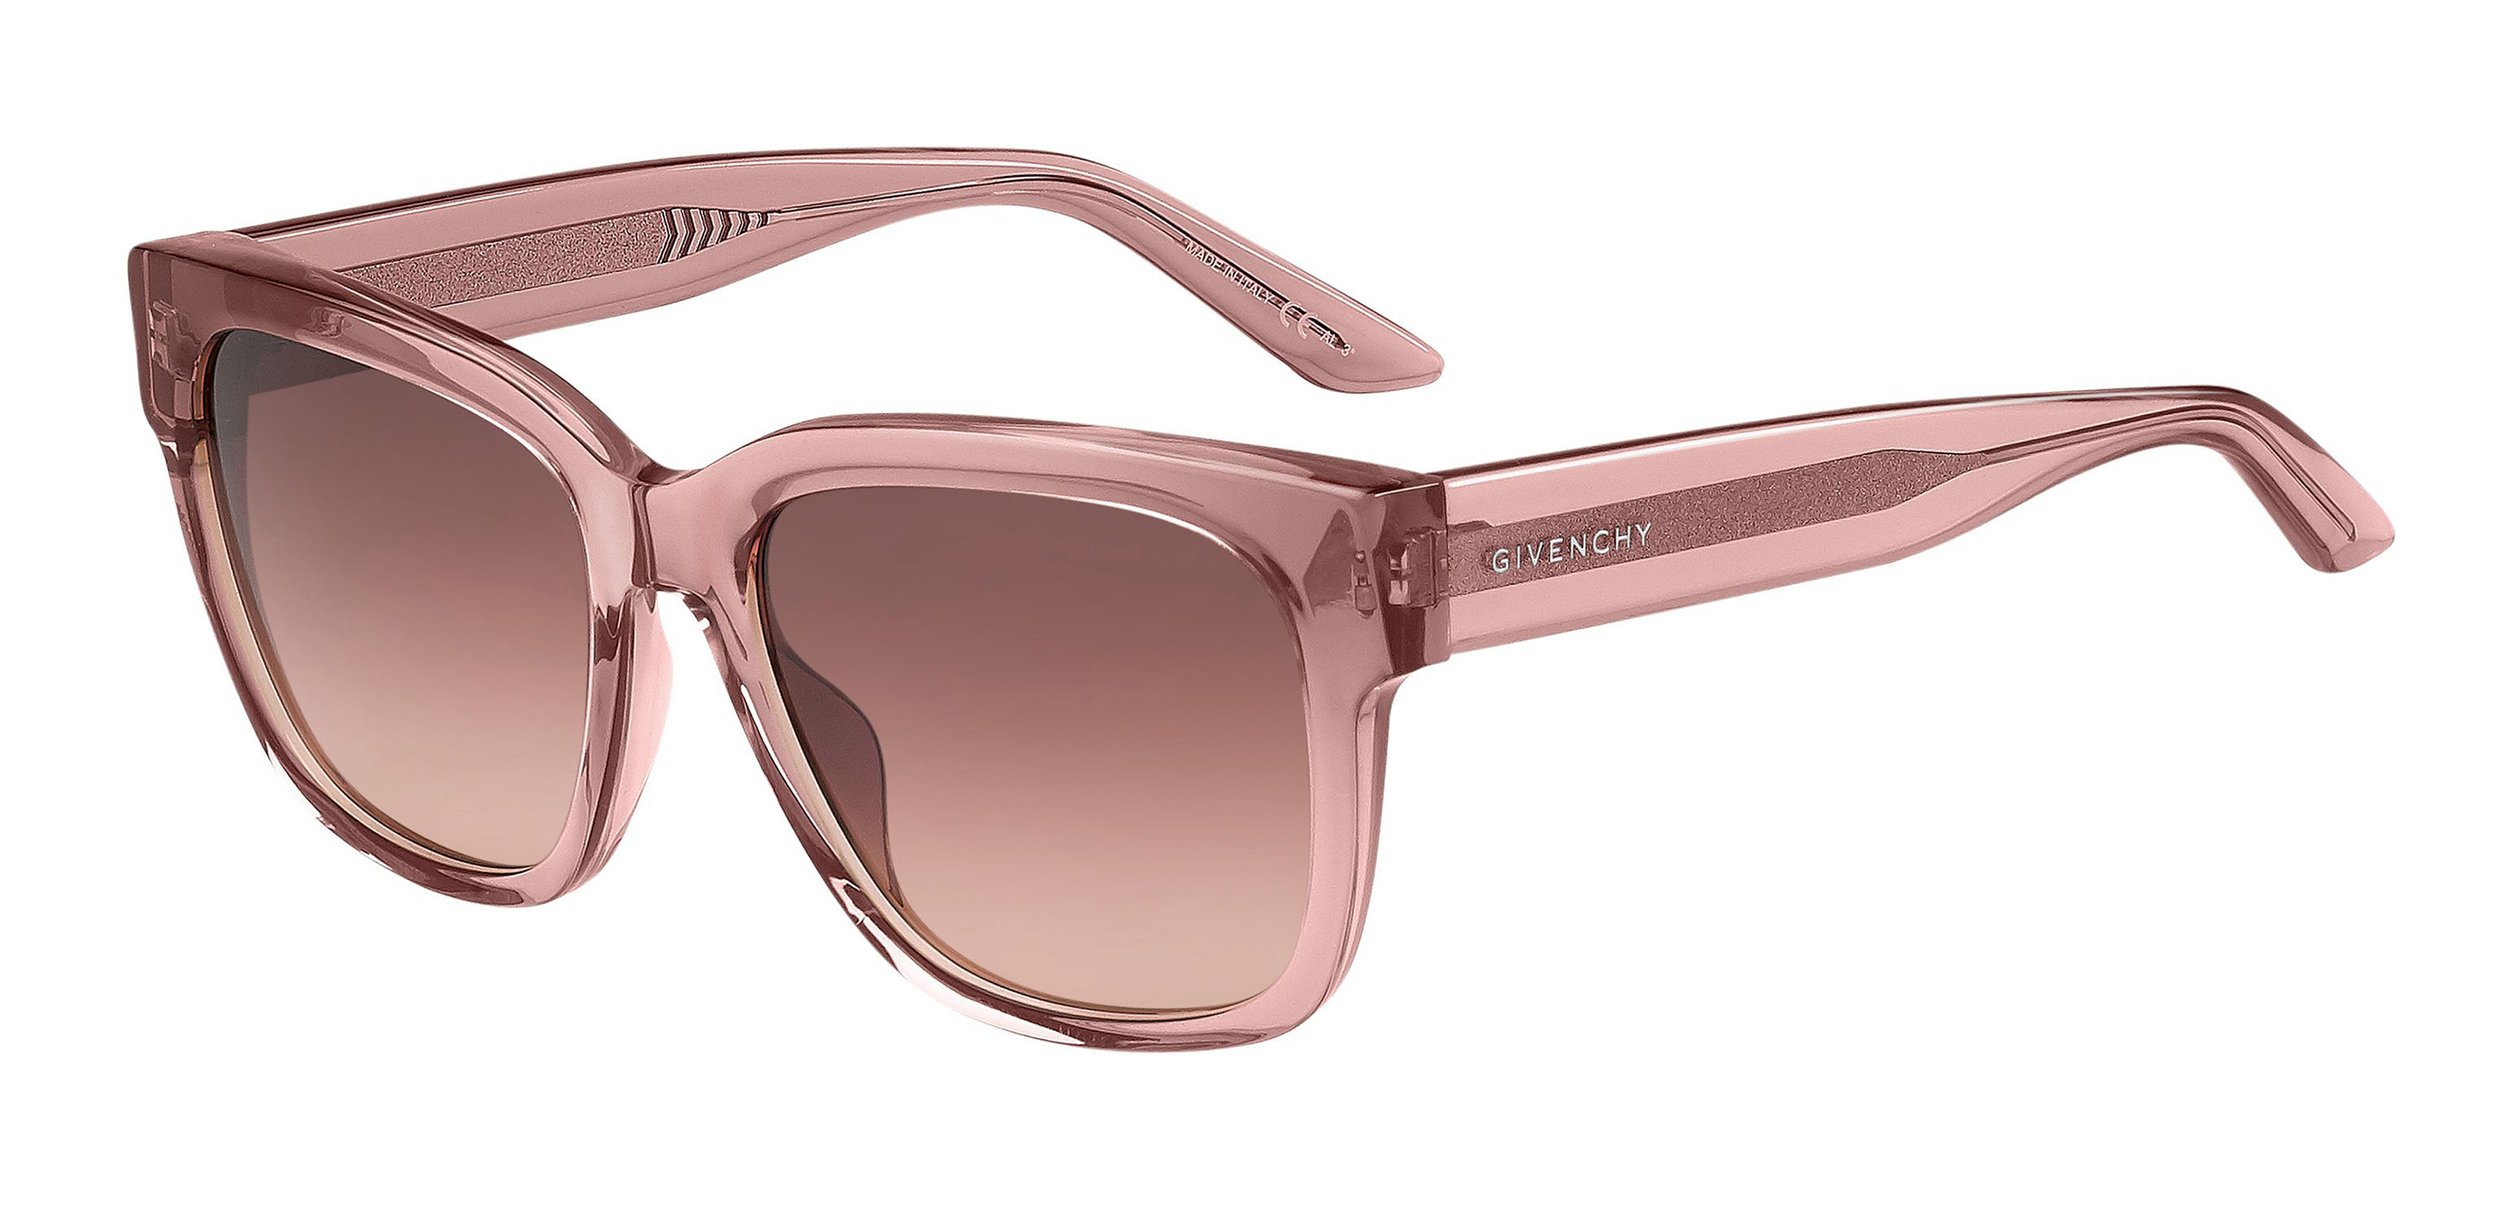 Givenchy Unisex Nude Pink Sunglasses €145, 